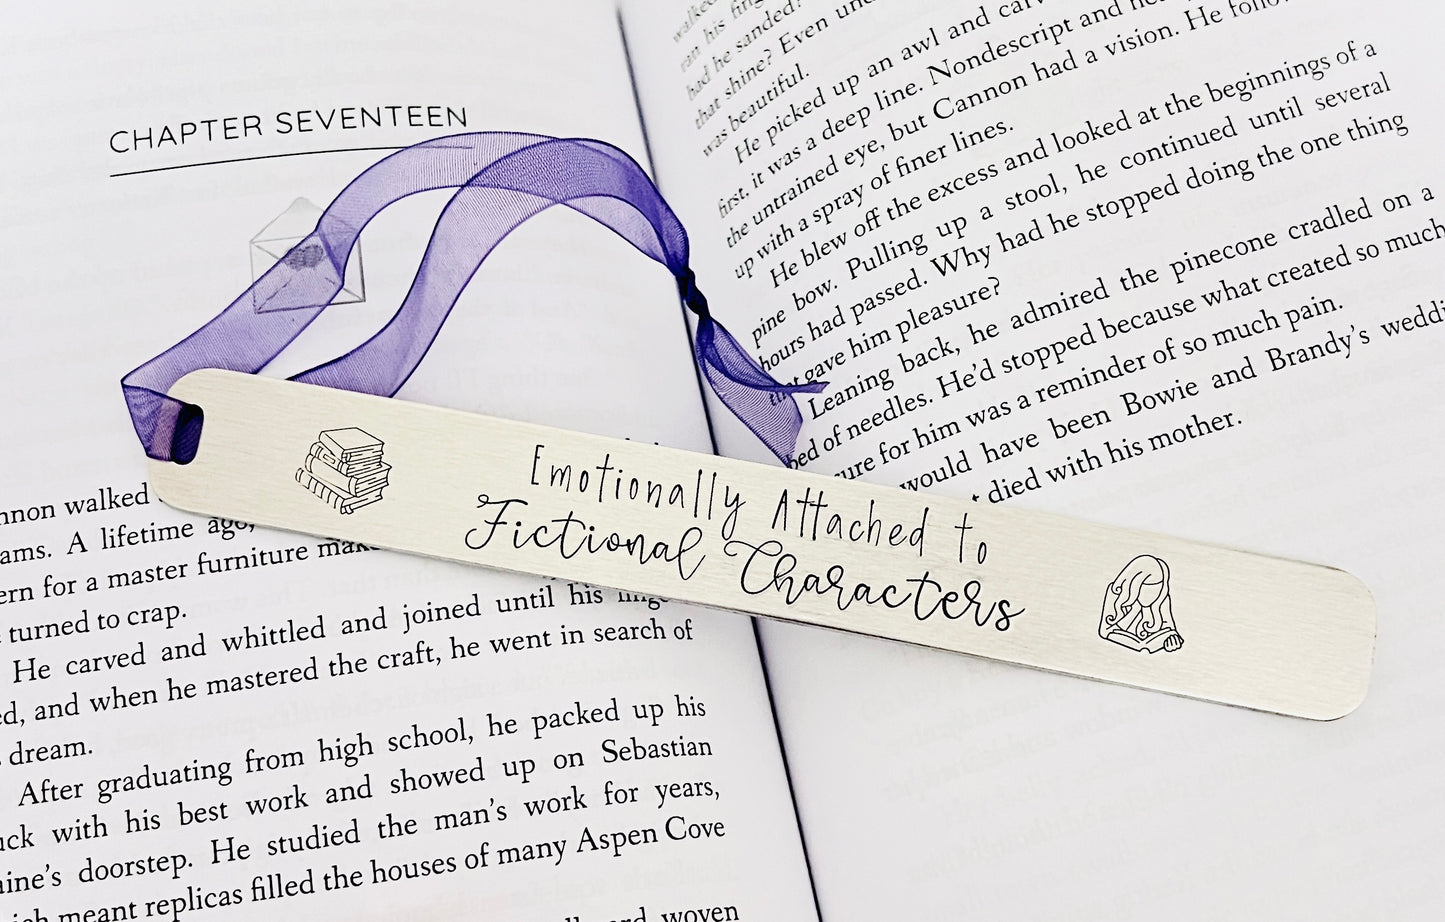 Emotionally Attached to Fictional Characters - Bookmark